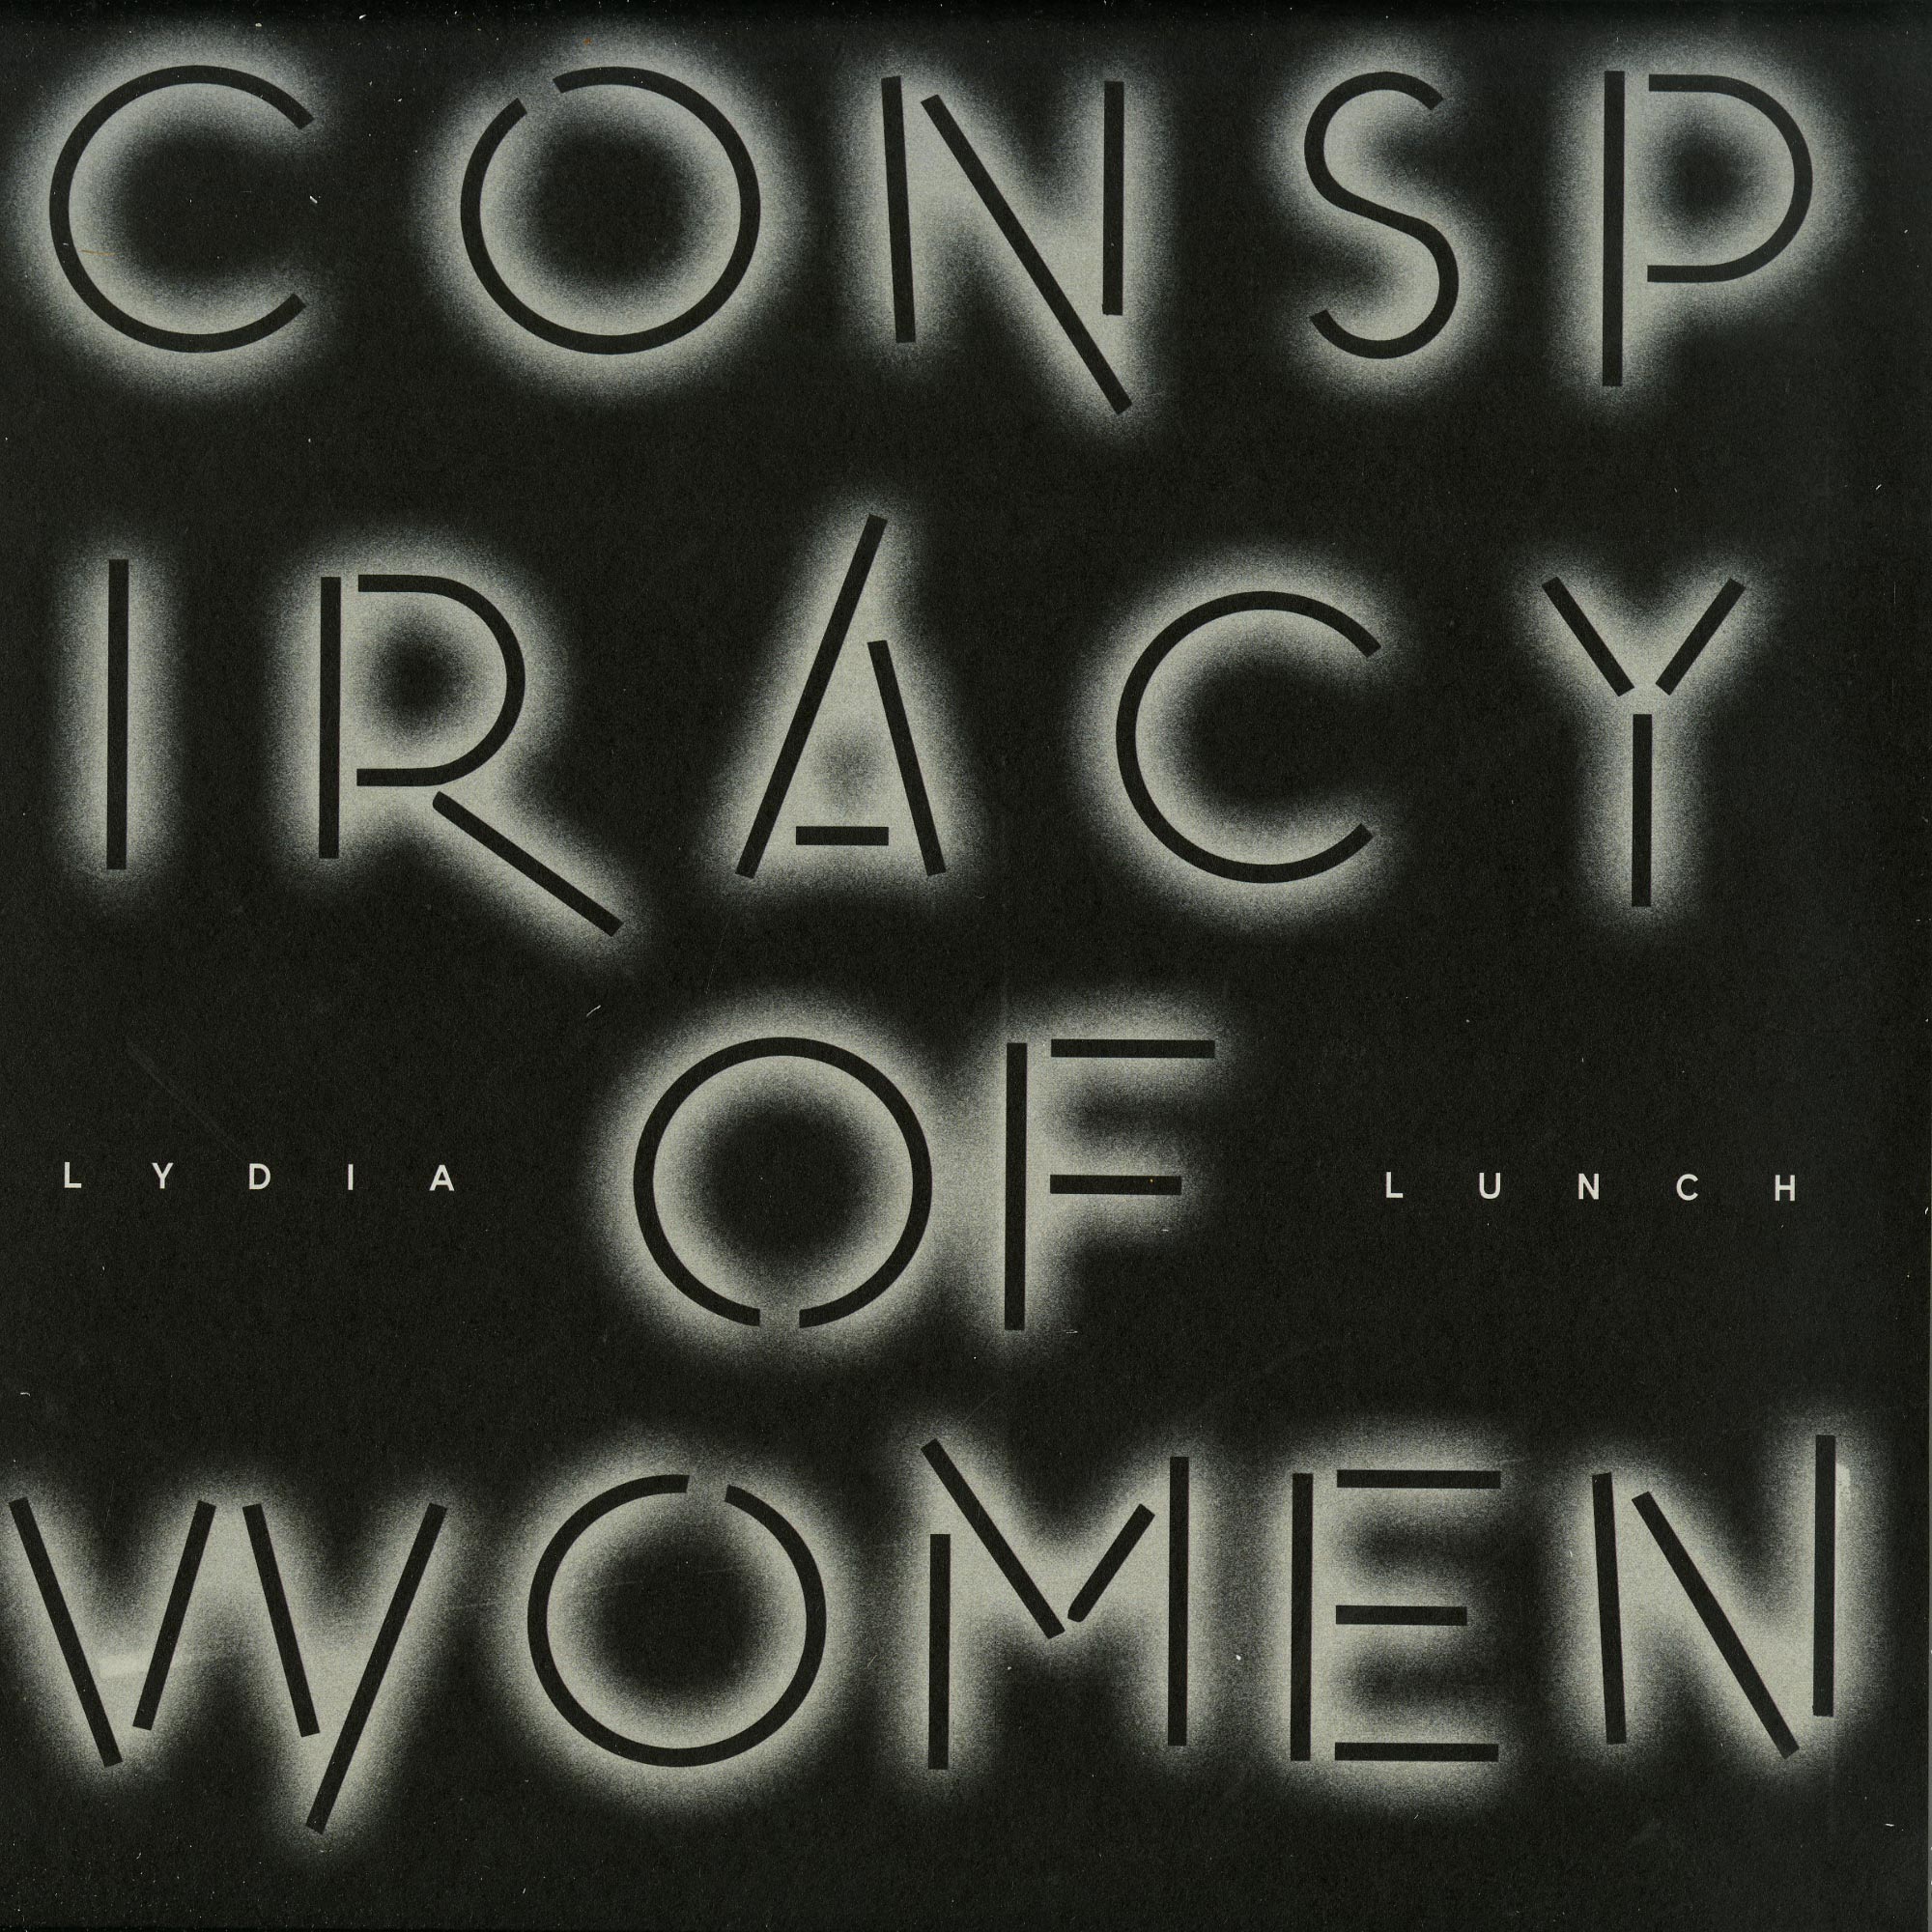 Lydia Lunch – Conspiracy Of Women